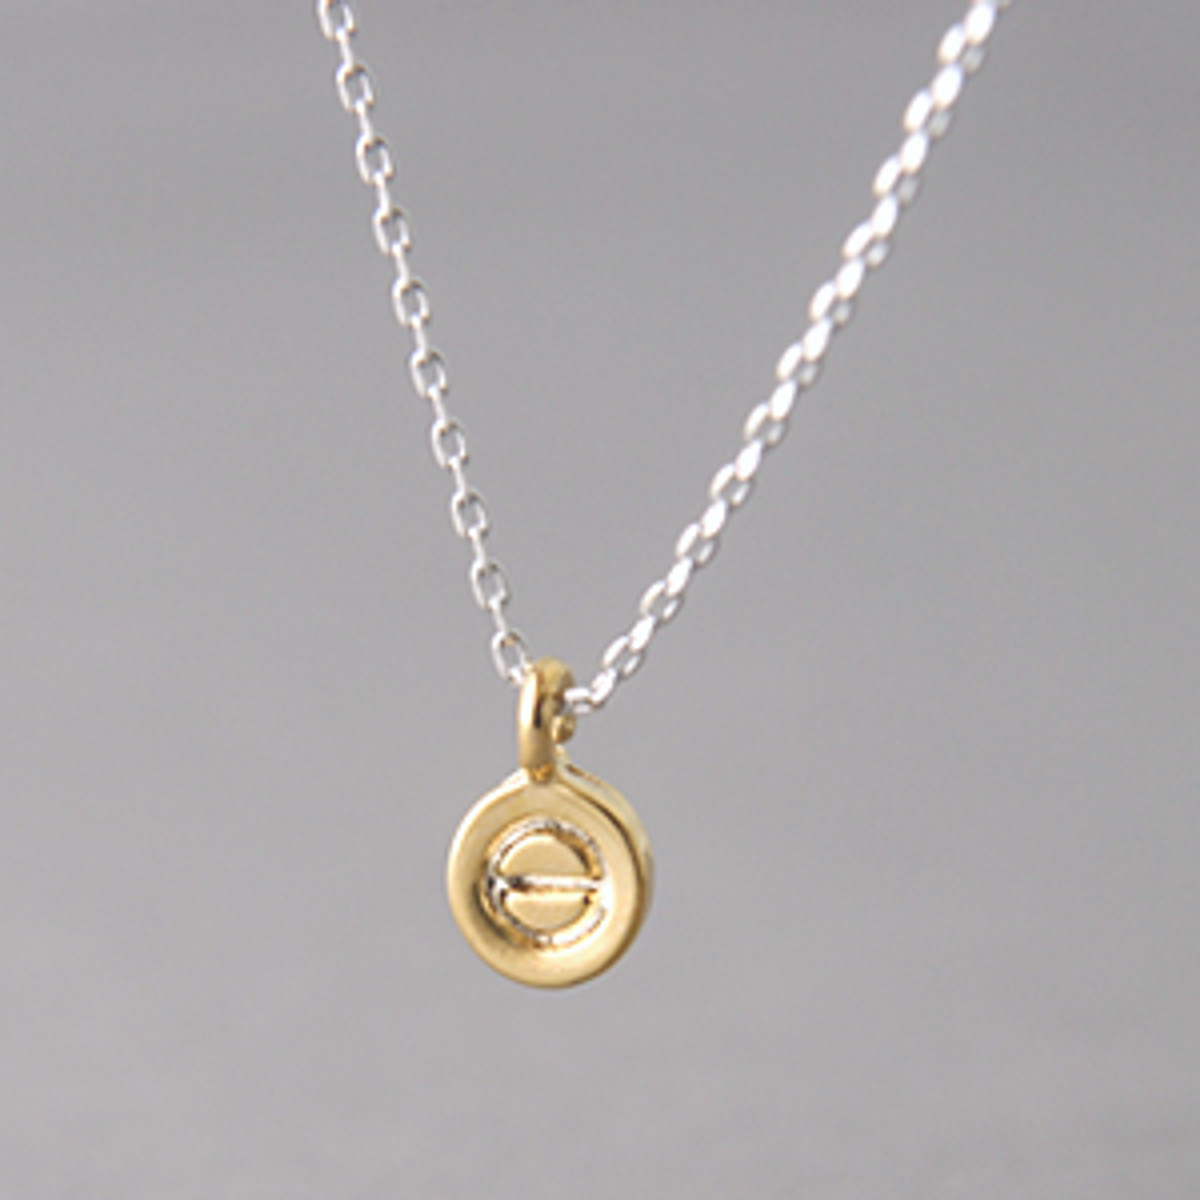 70cm Gold Circle Love Charm Necklace Sterling Silver - kellinsilver.com